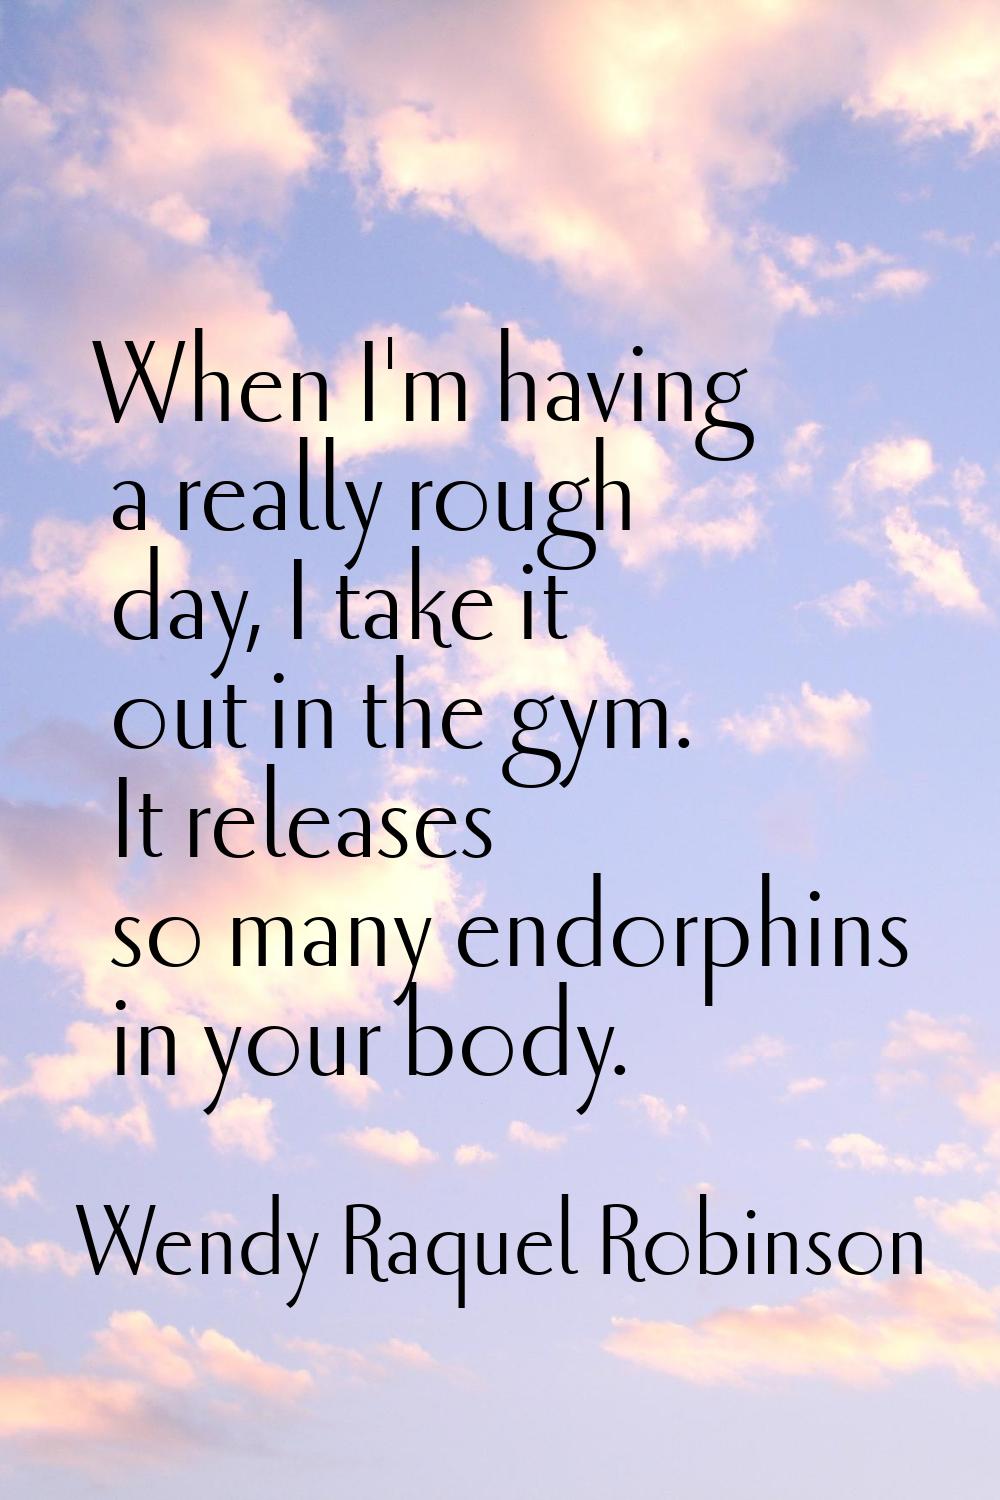 When I'm having a really rough day, I take it out in the gym. It releases so many endorphins in you